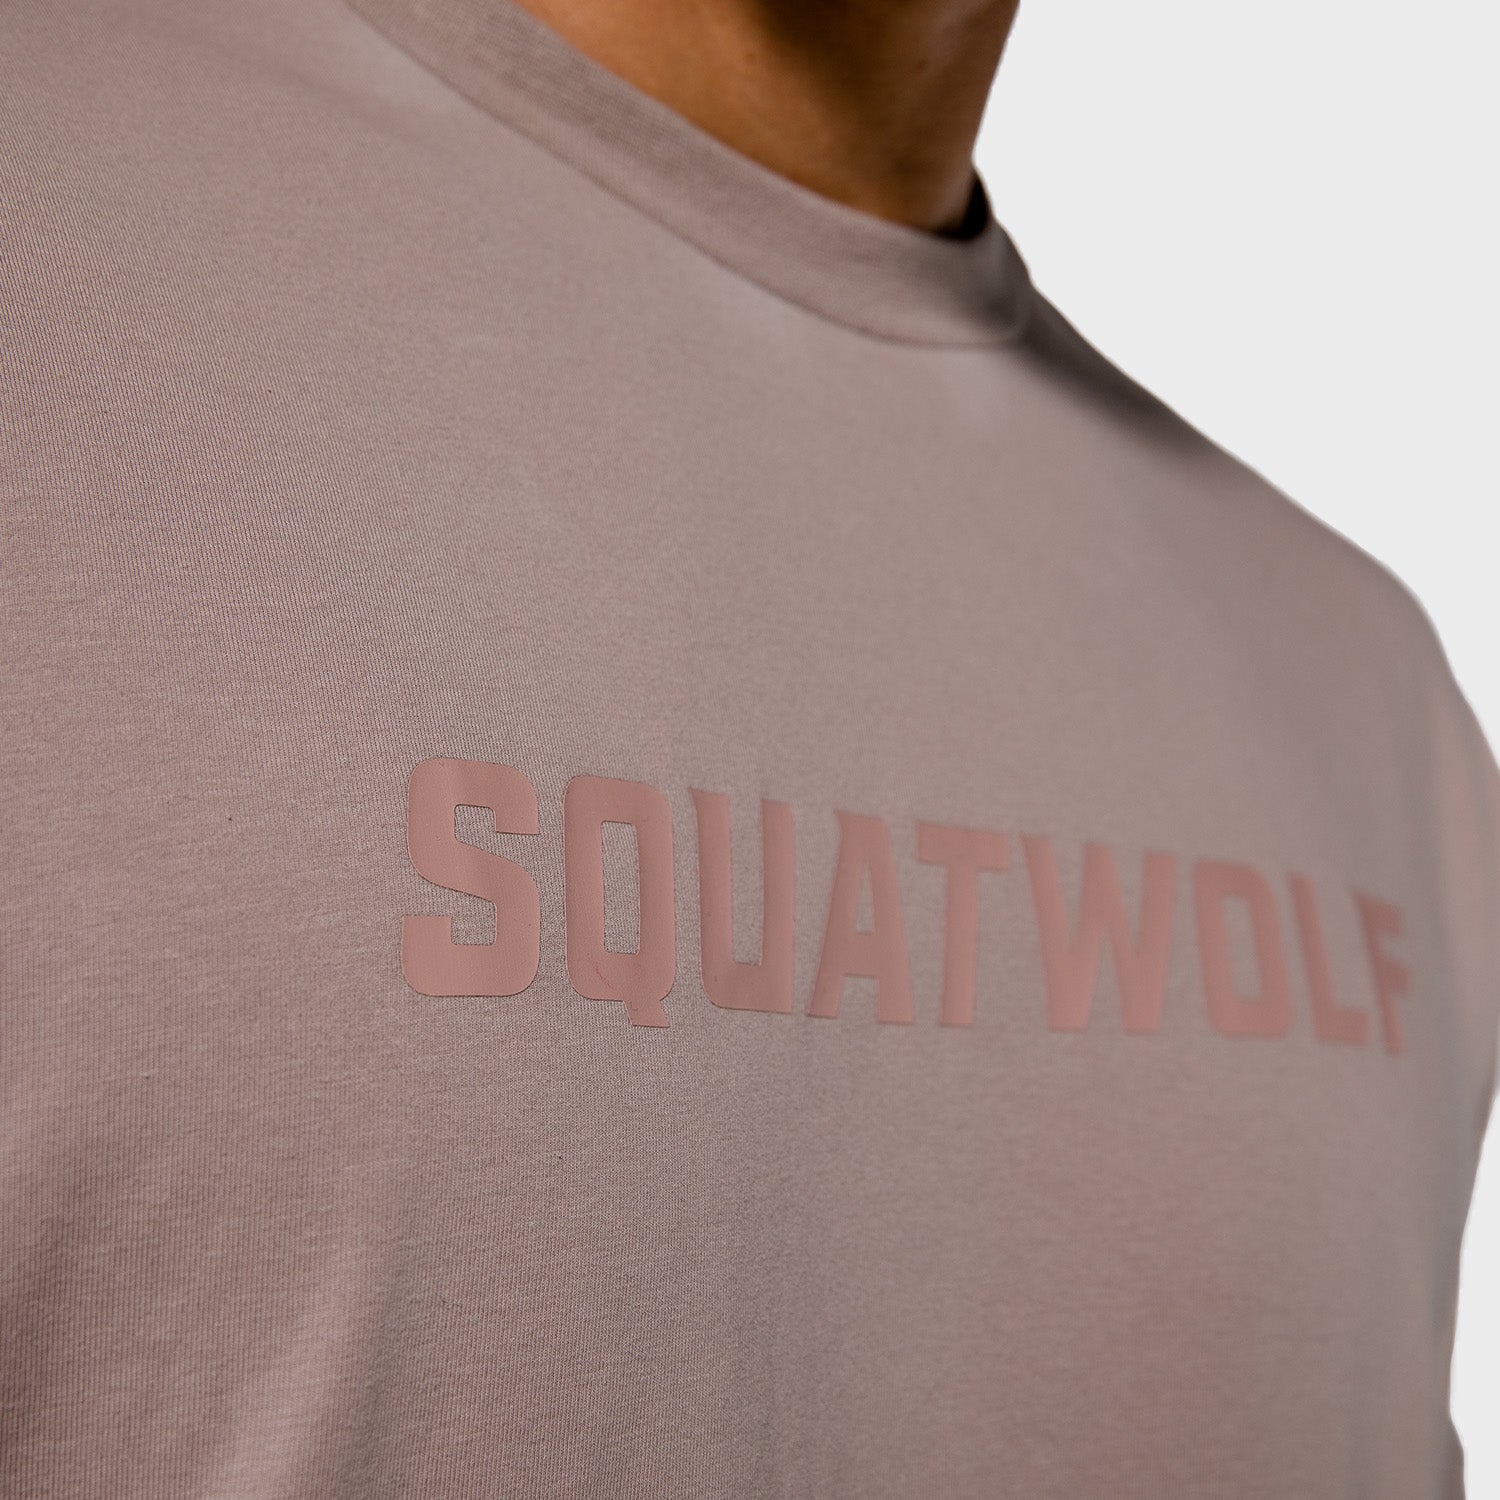 squatwolf-gym-t-shirts-for-women-iconic-oversize-tee-sand-workout-clothes